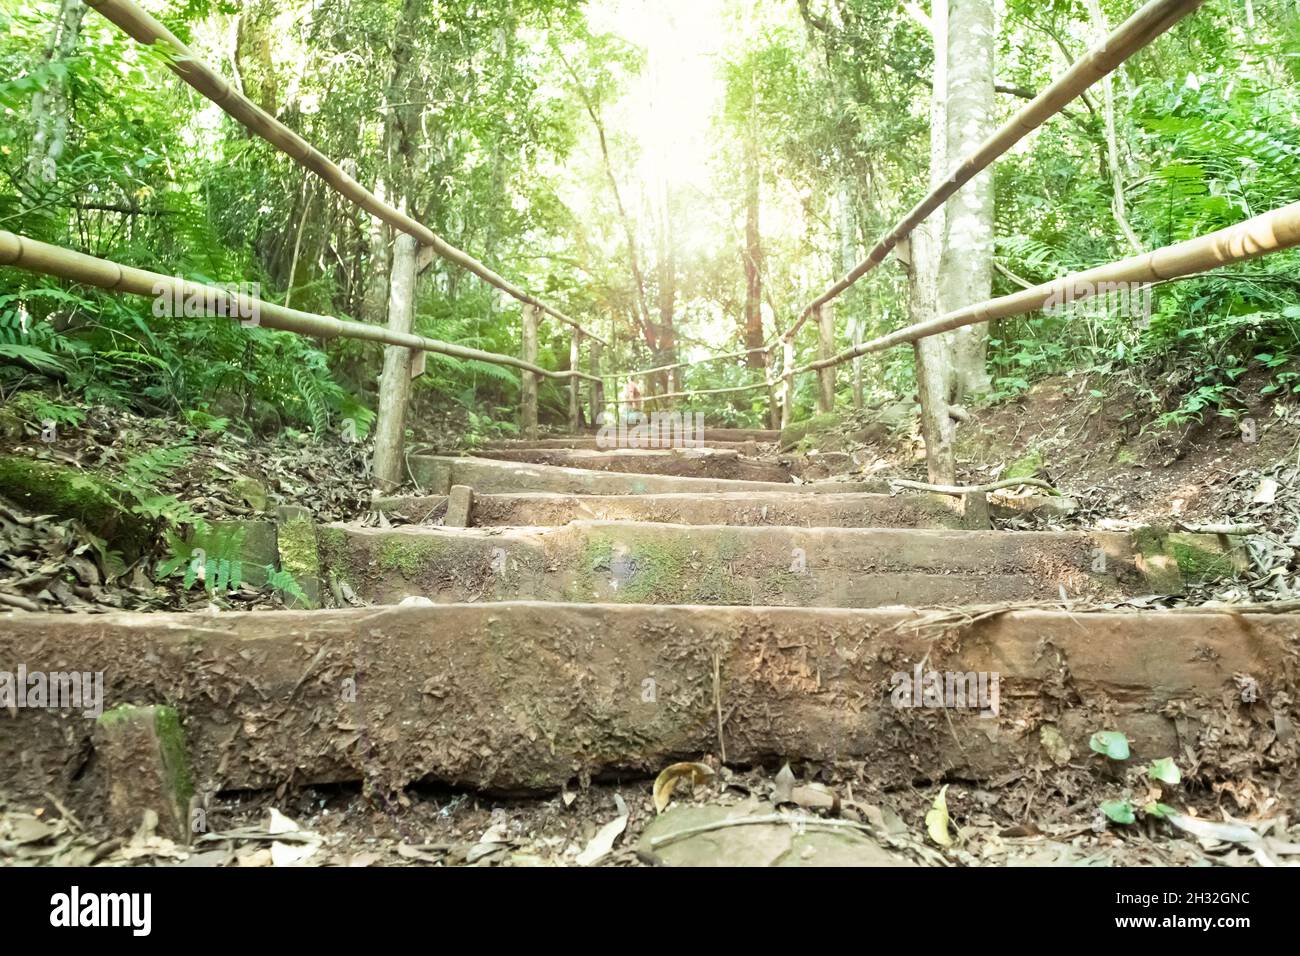 Stairs inside the forest in Londrina, Park Arthur Thomas. Stock Photo